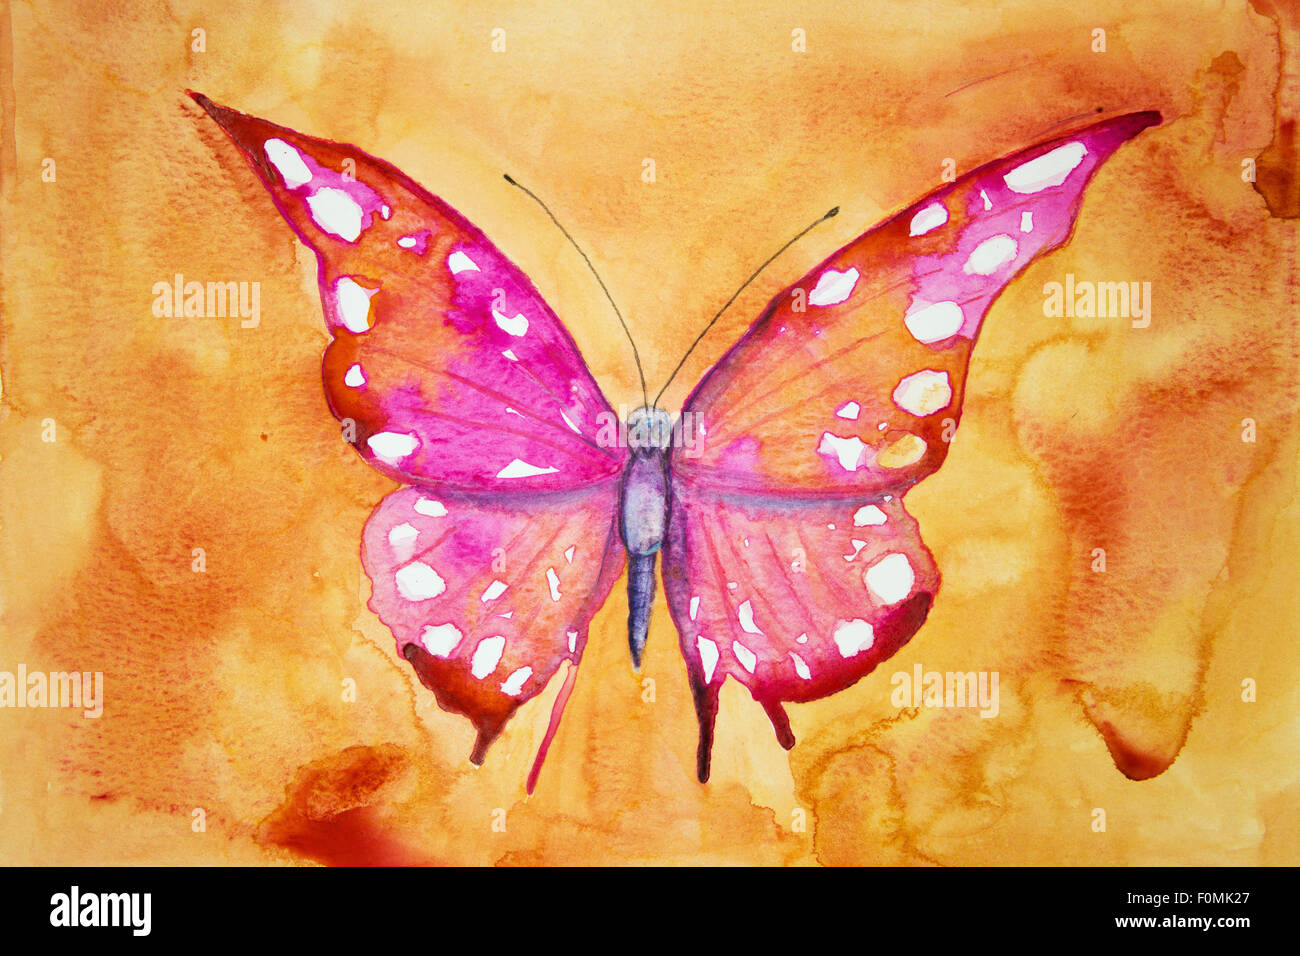 Pink butterfly with orange background. The dabbing technique gives a soft focus effect due to the altered surface roughness of t Stock Photo